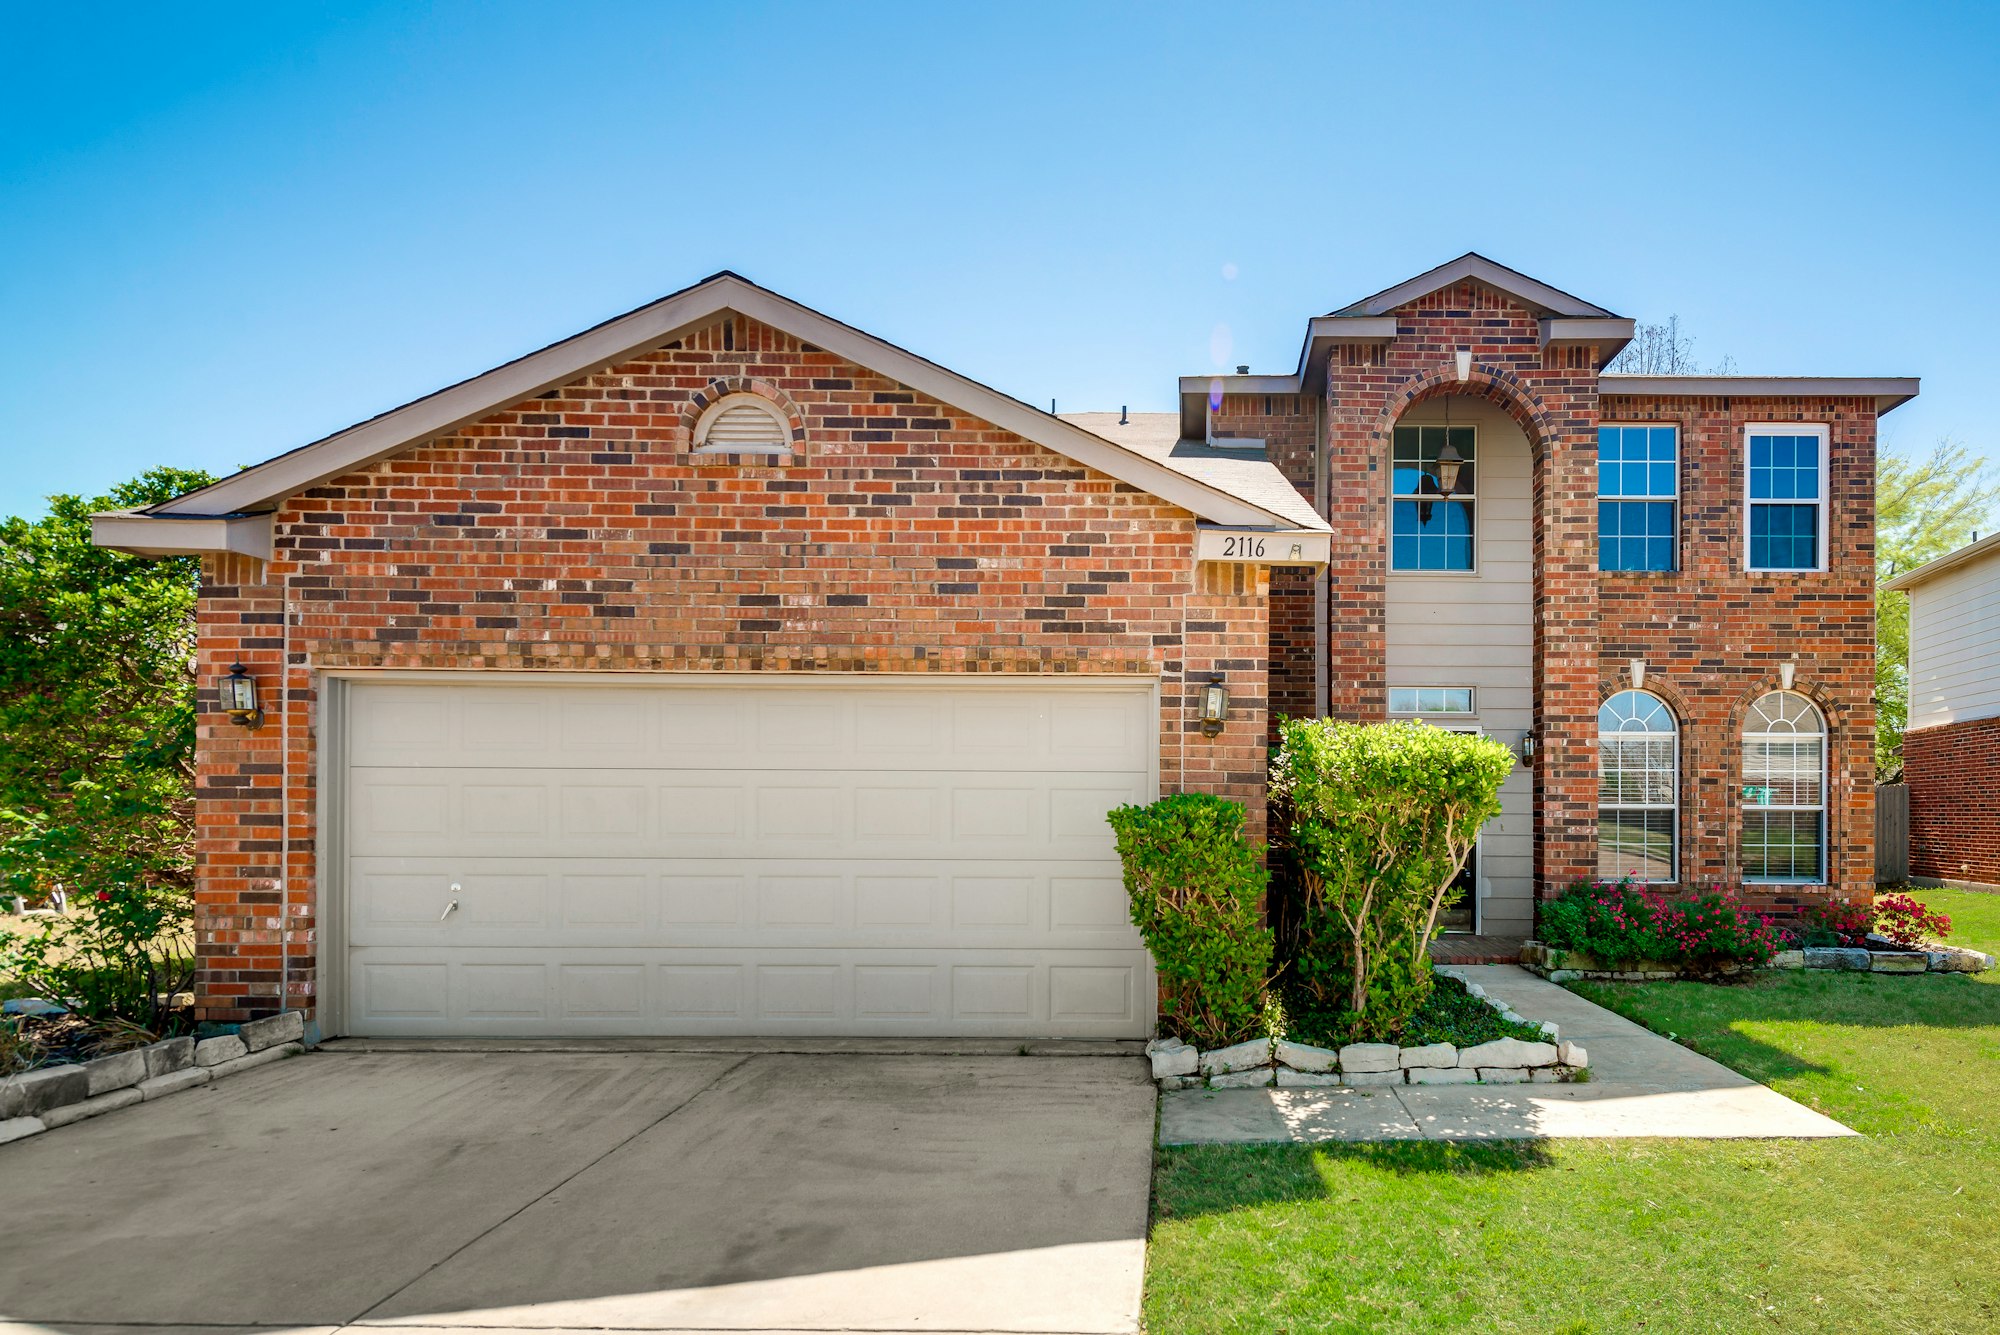 Photo 1 of 28 - 2116 Willow Ct, Little Elm, TX 75068